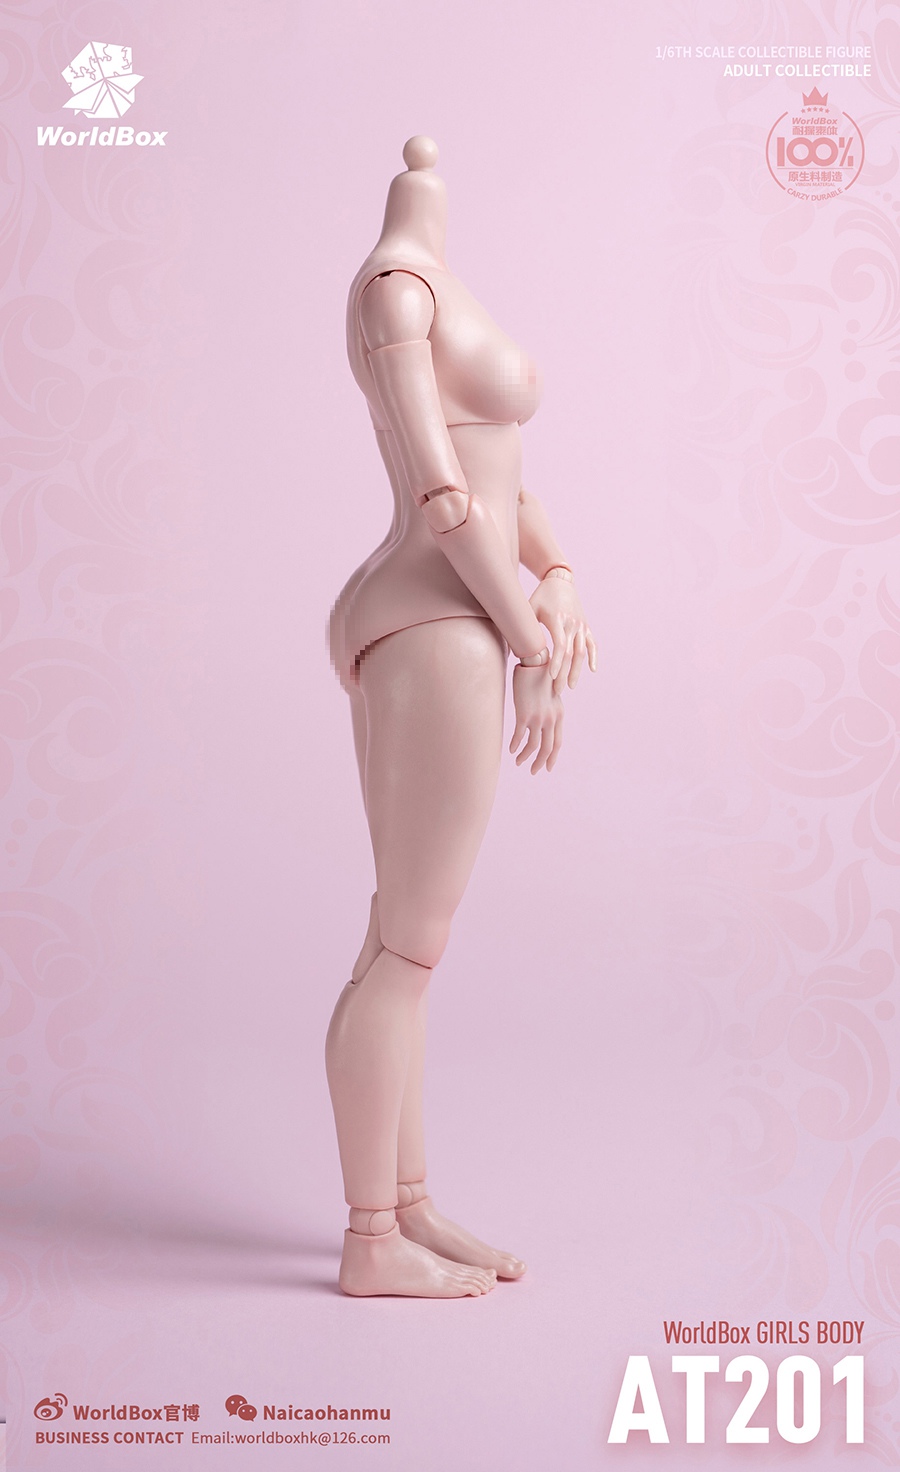 2 - Worldbox GIRLS BODY (jointed female figure) at201/202 Fig410